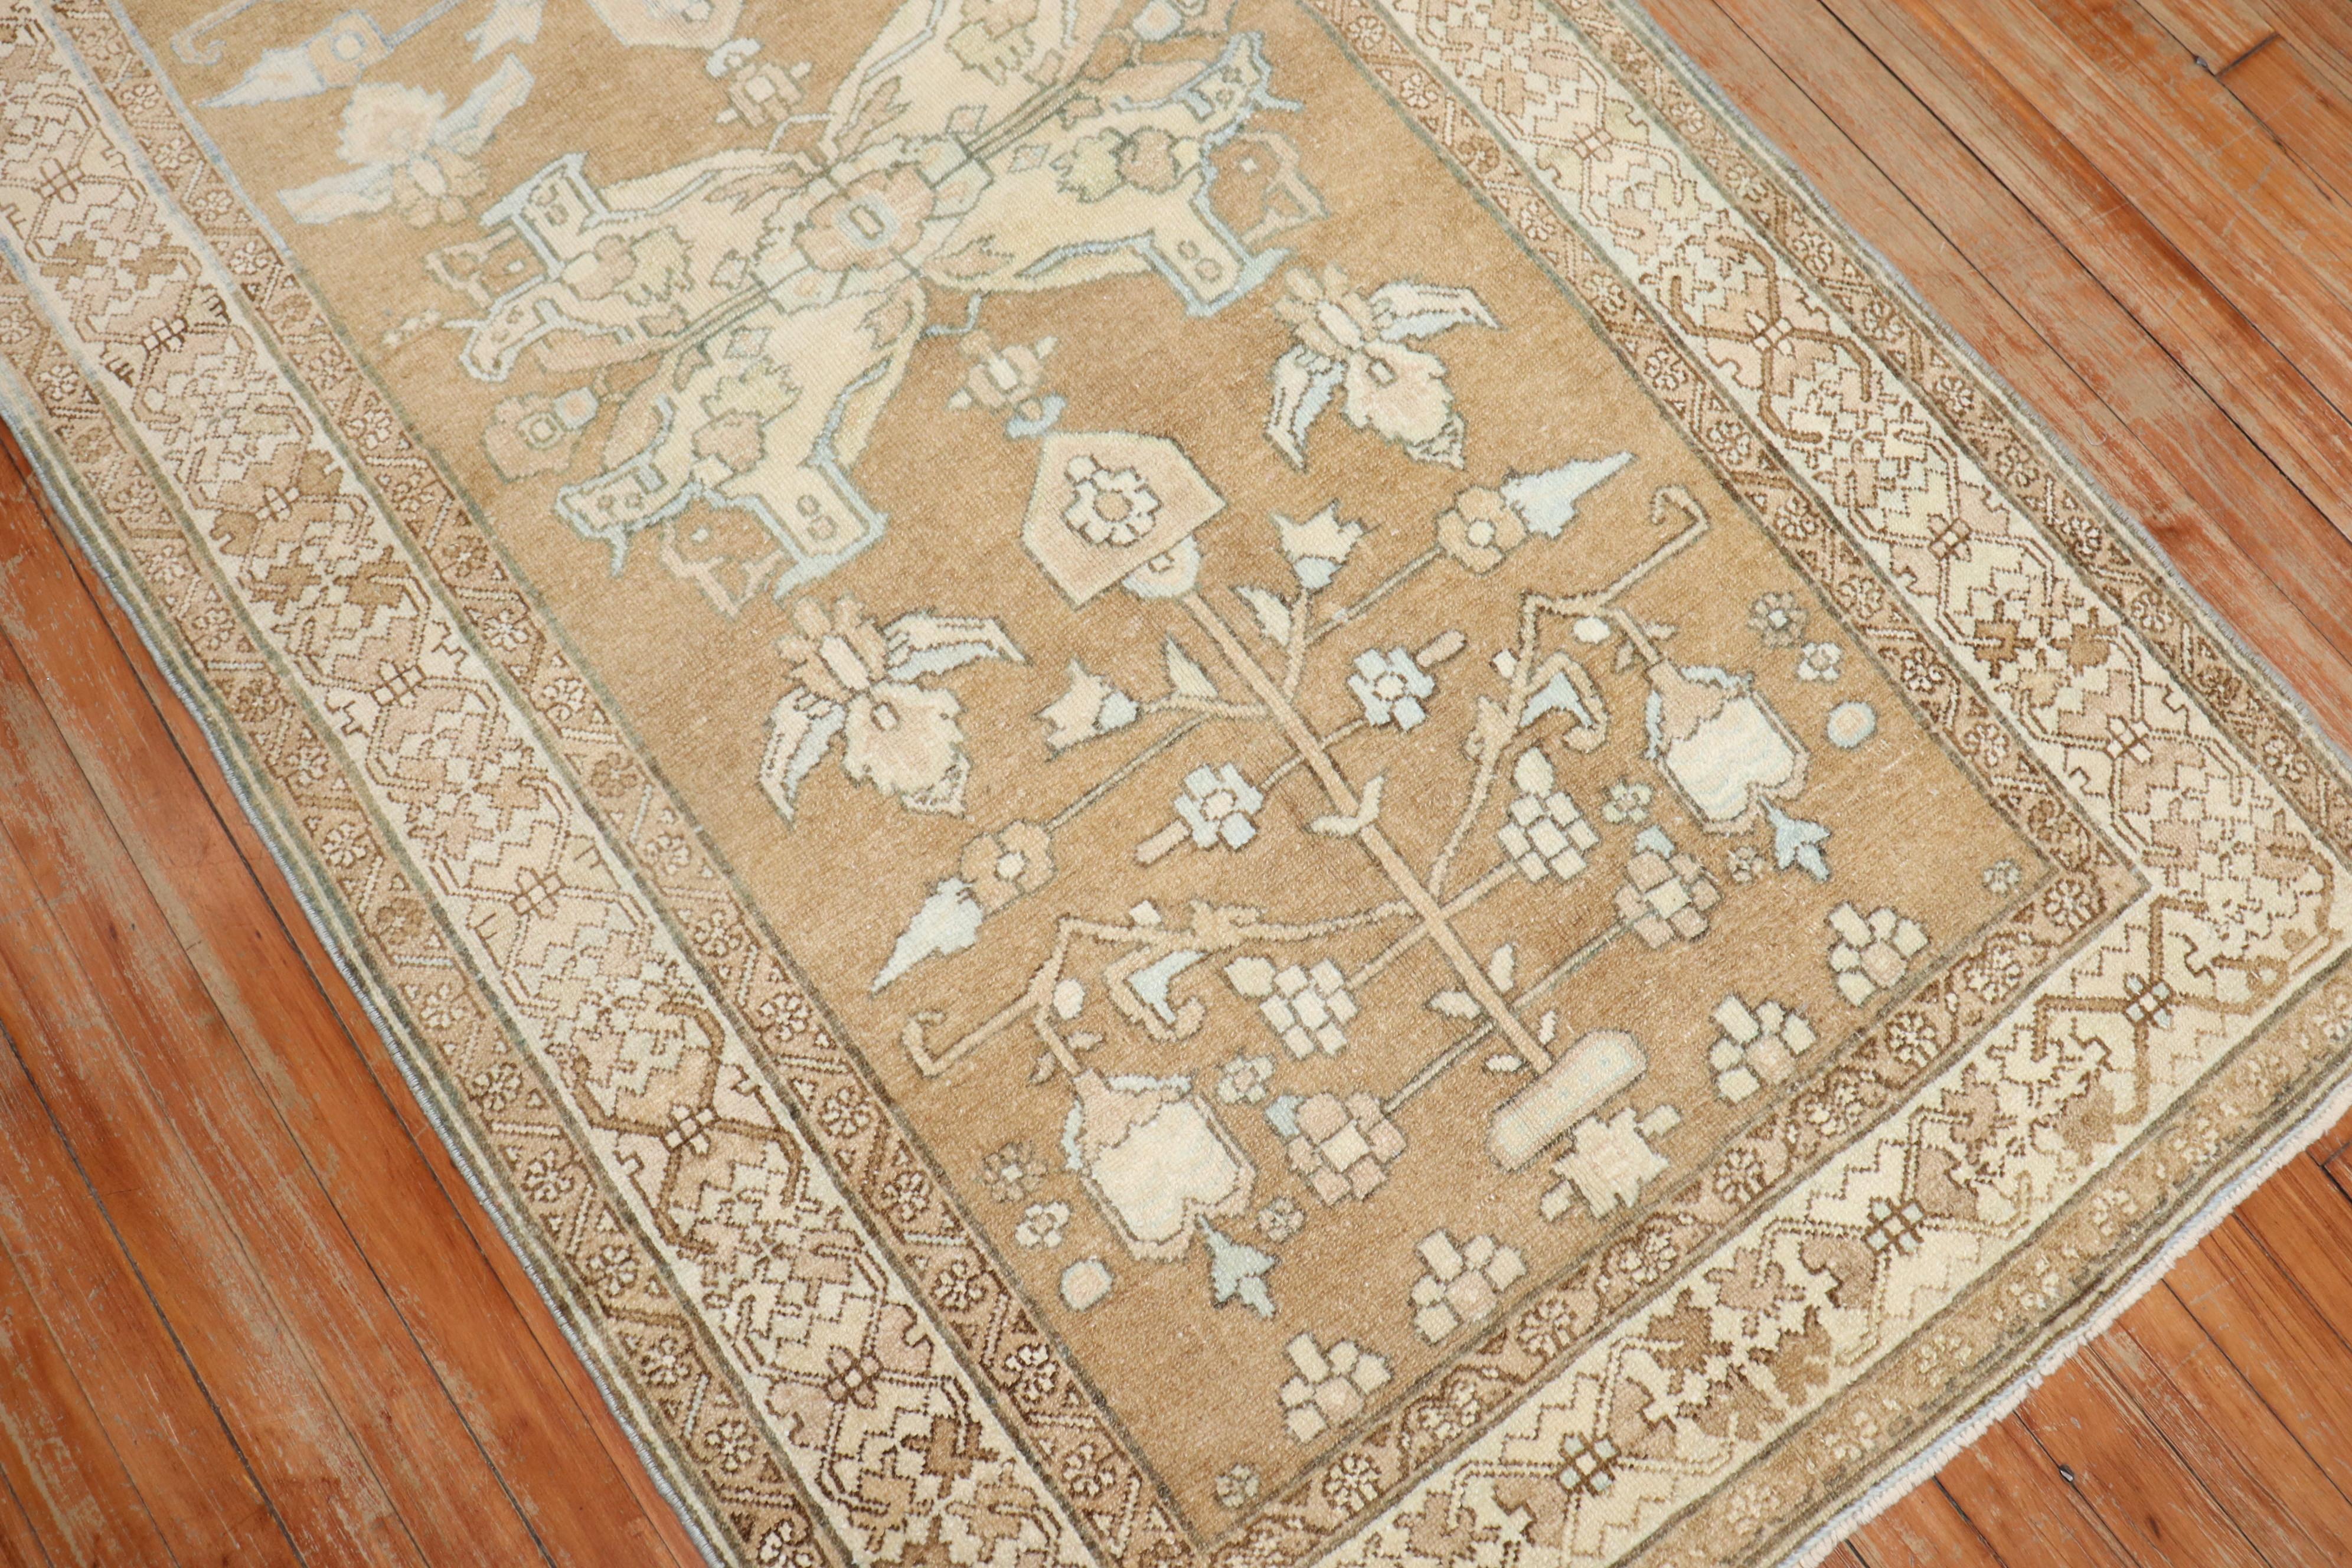 mid-20th century Persian rug in light brown, accents in white and light blue

Measures: 3'5